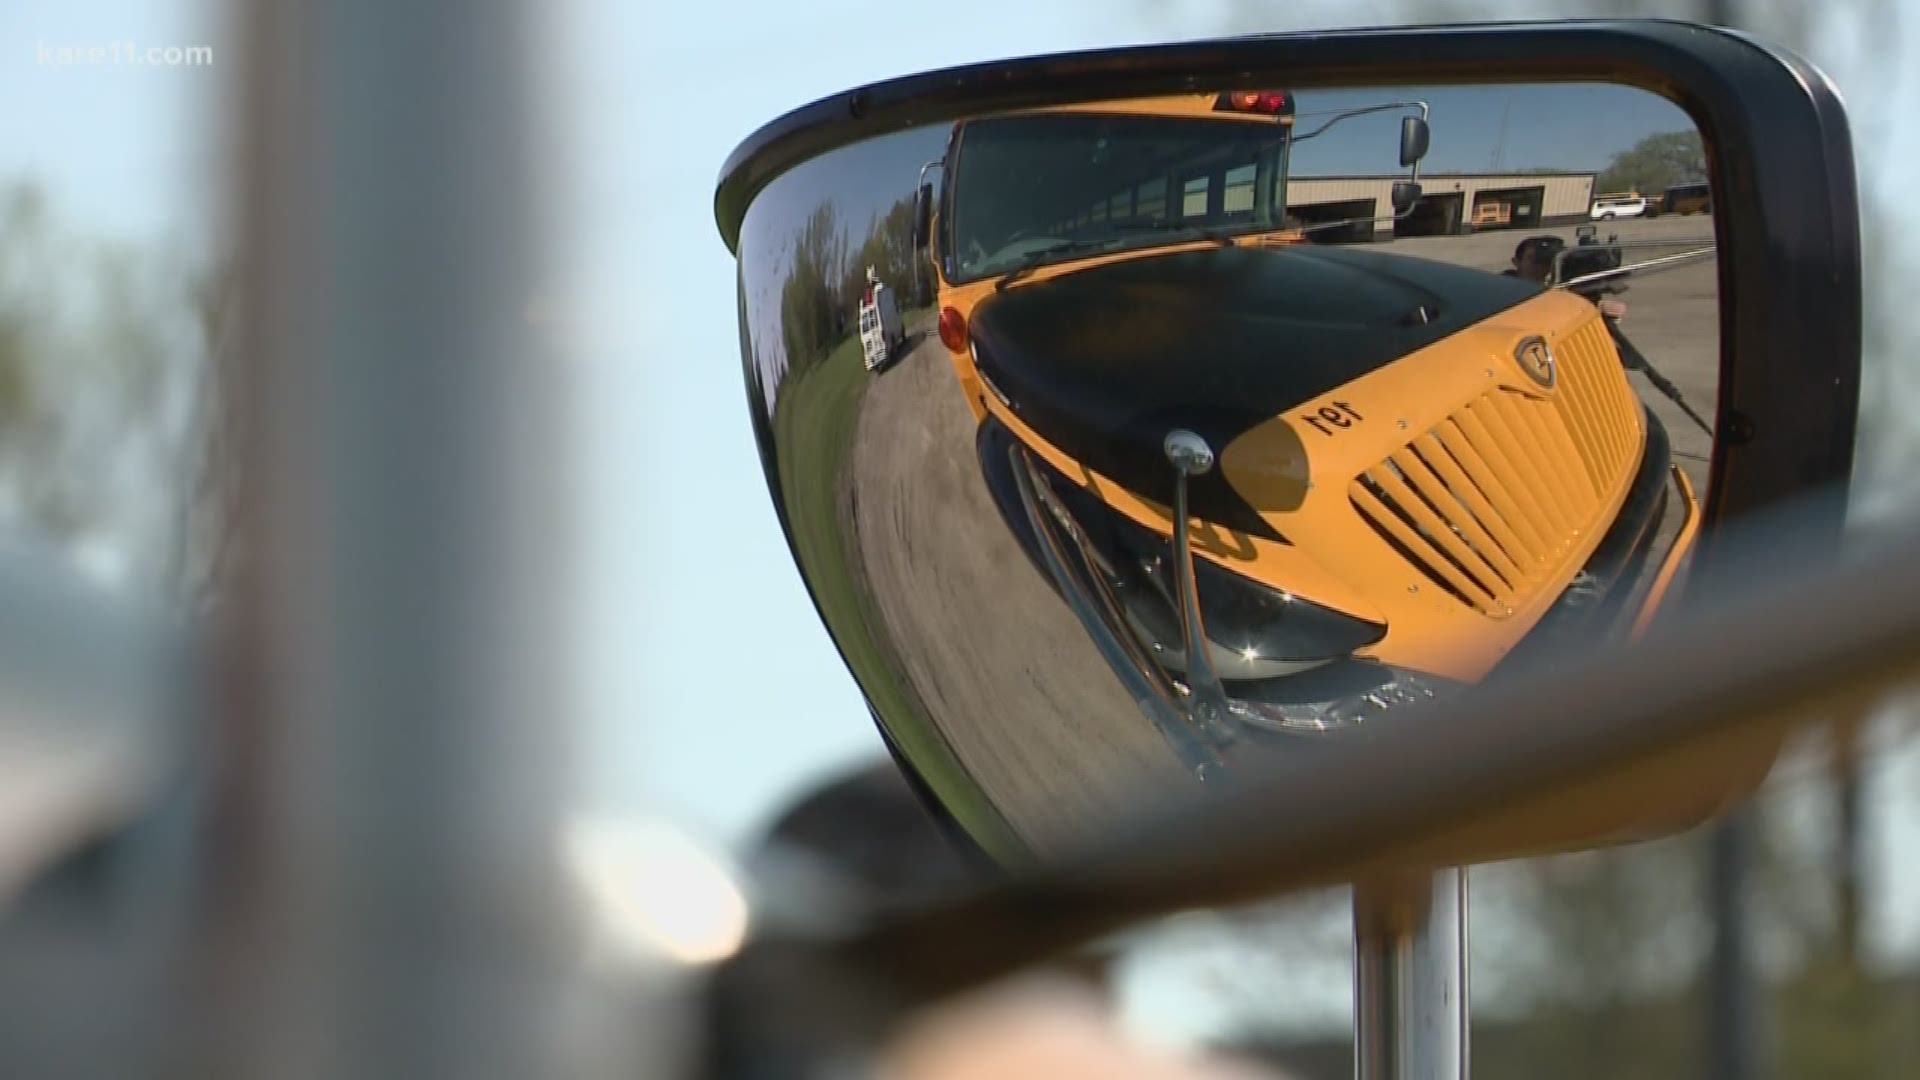 Delano is the latest community that KARE 11 is hearing about with a shared problem: Drivers passing school buses with their stop arms activated. The violation will cost you $500, but the poor decisionmaking is also putting kids in danger.